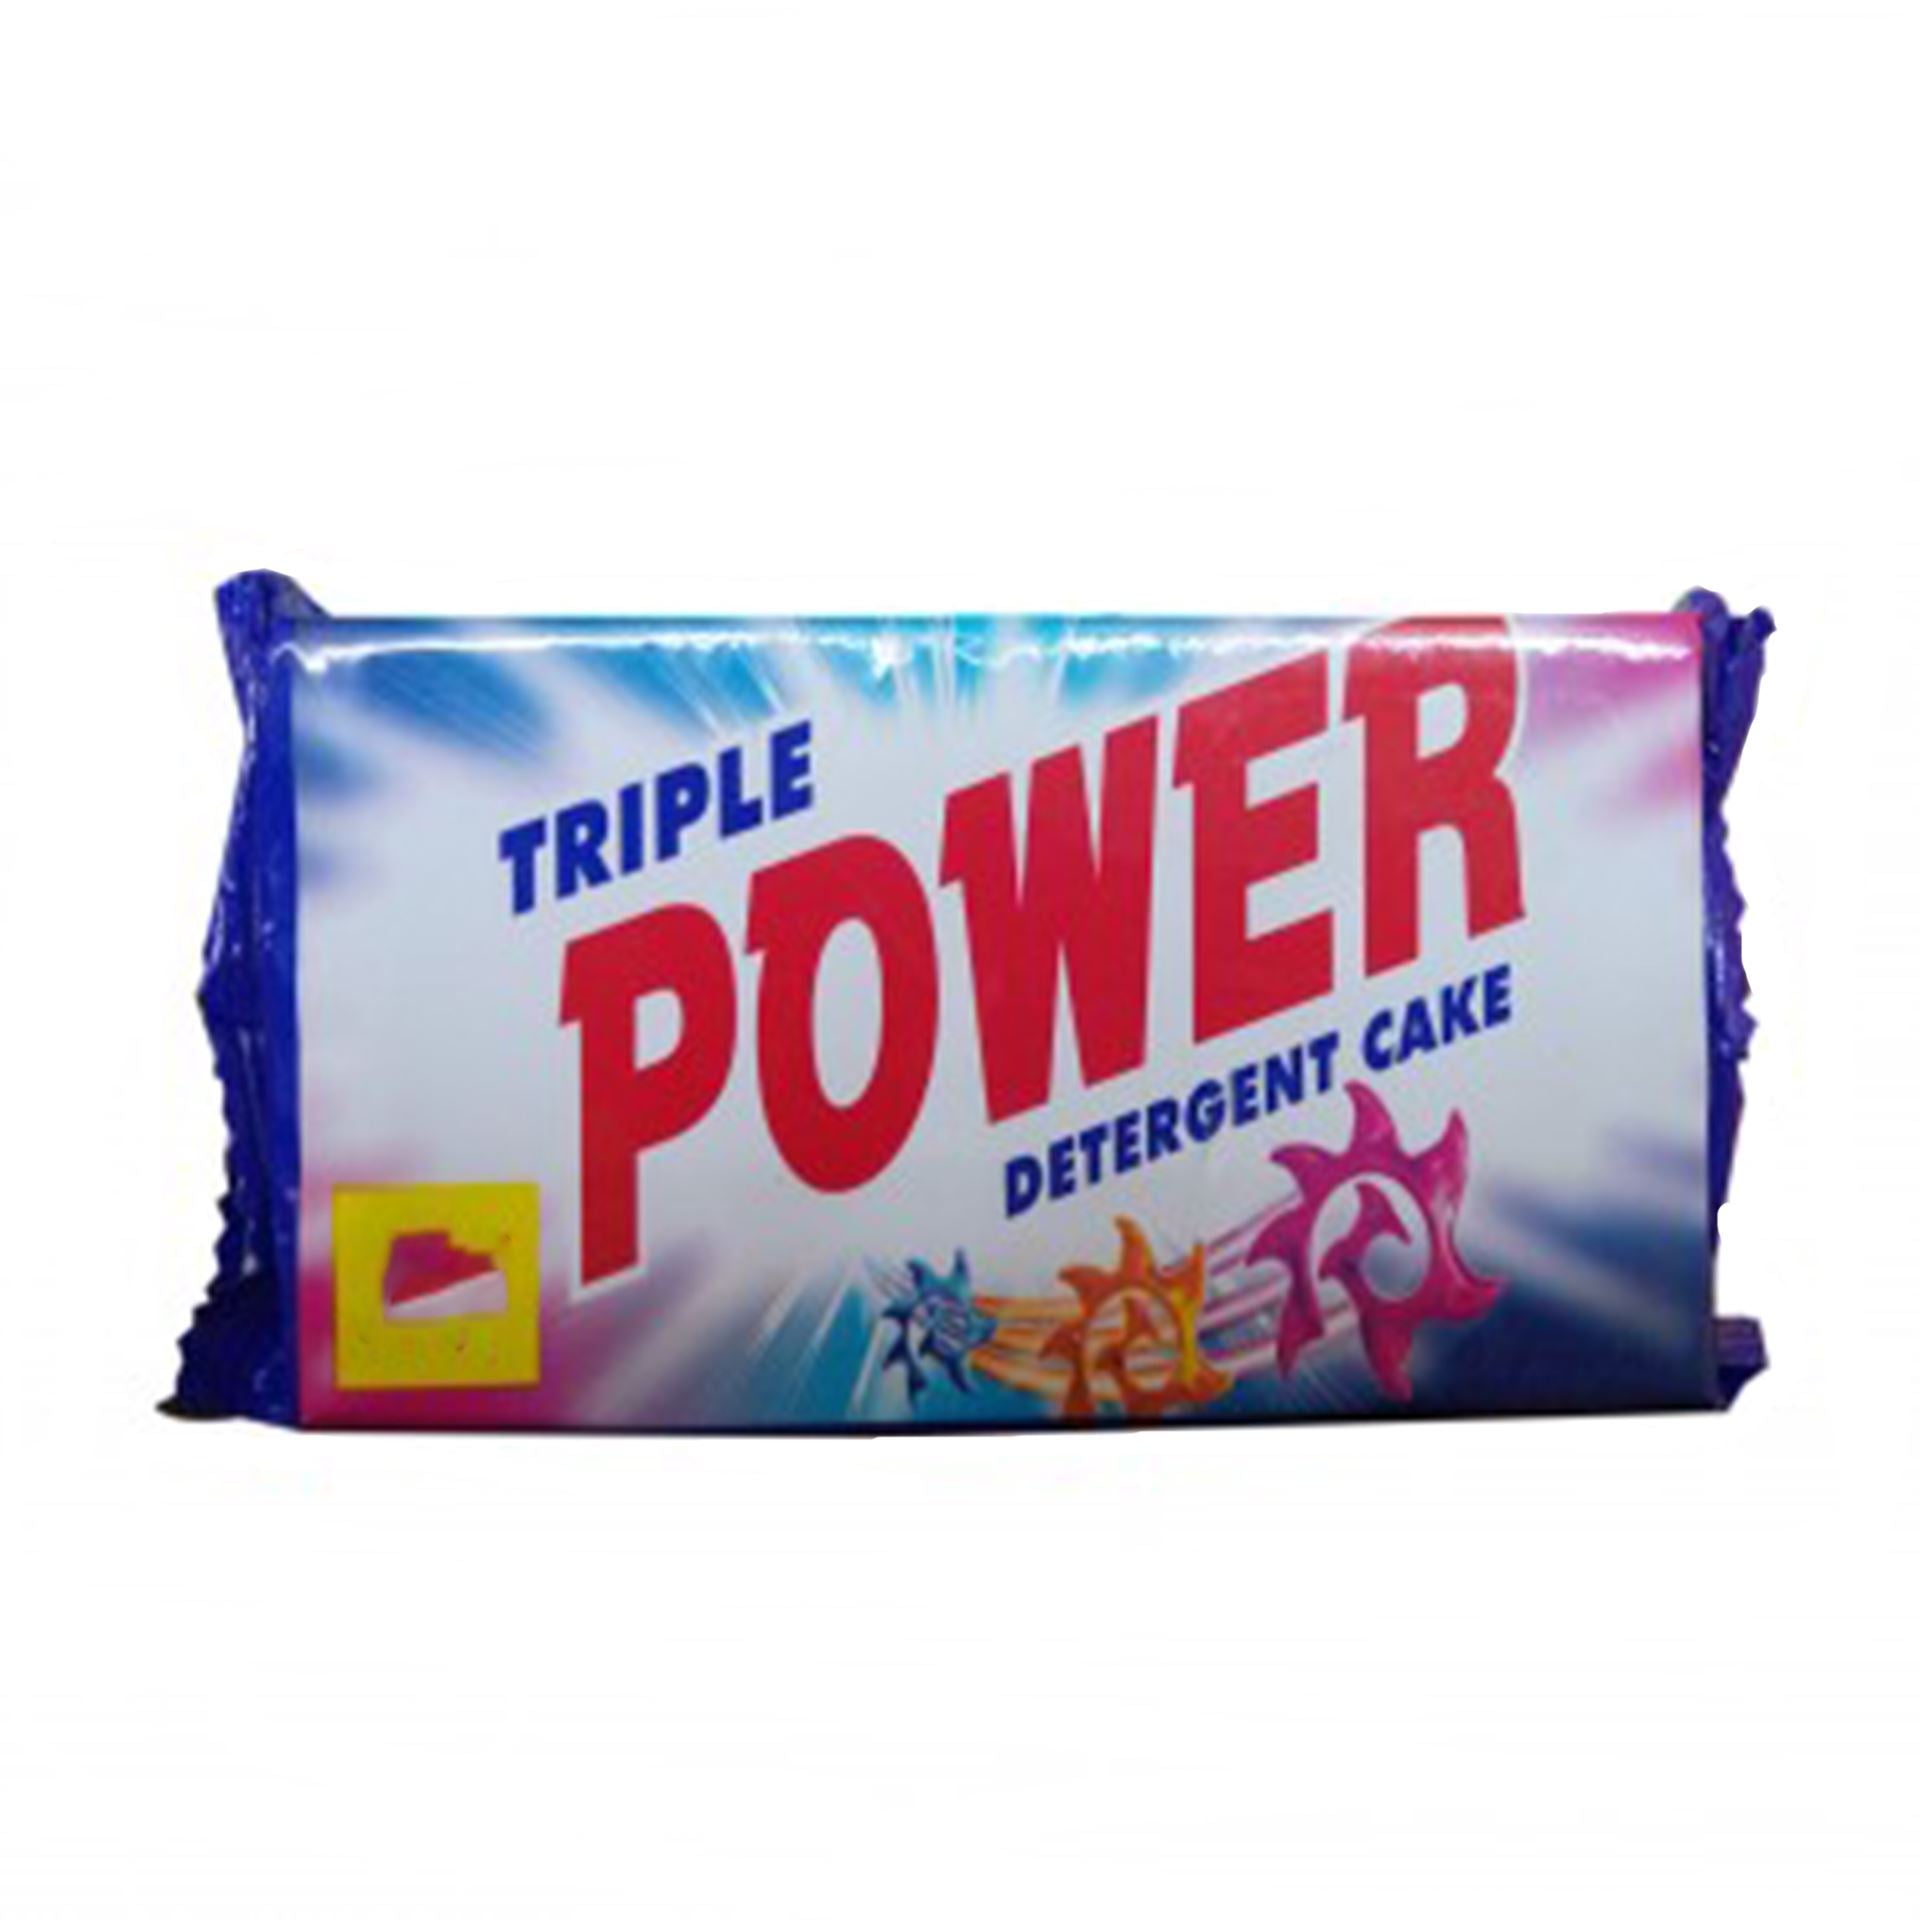 STAR BLUE detergent cake, Packaging Size: 60 Pcs at Rs 300/box in Surat